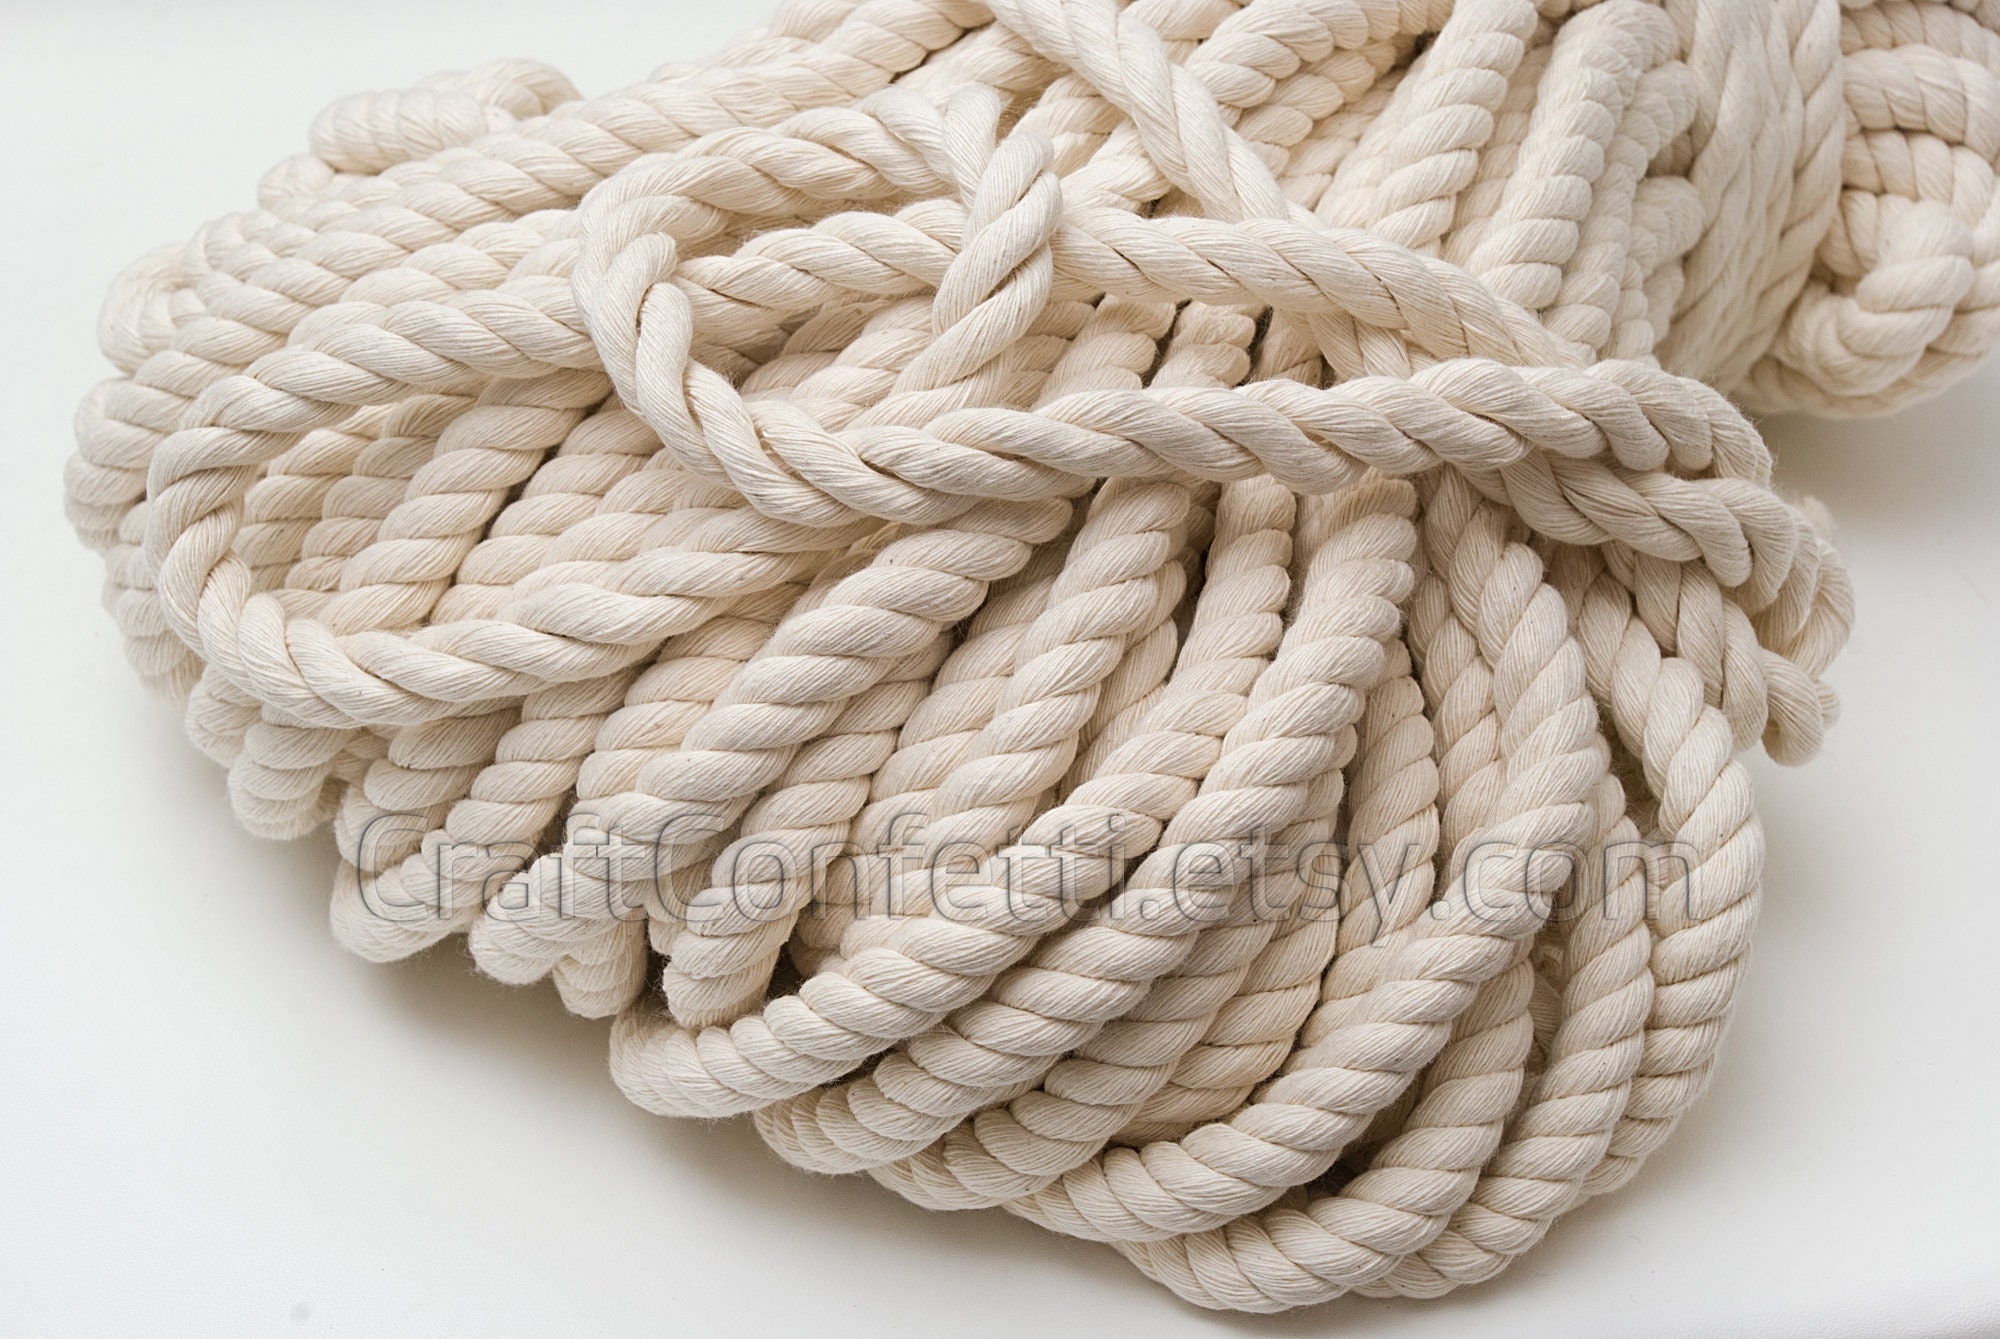 Beige Cotton Rope 12mm. Nautical Rope. Twisted Thick Rope. Decoration Rope.  Craft Supplies. Nautical Decor / 30ft 10yd 9m -  Israel